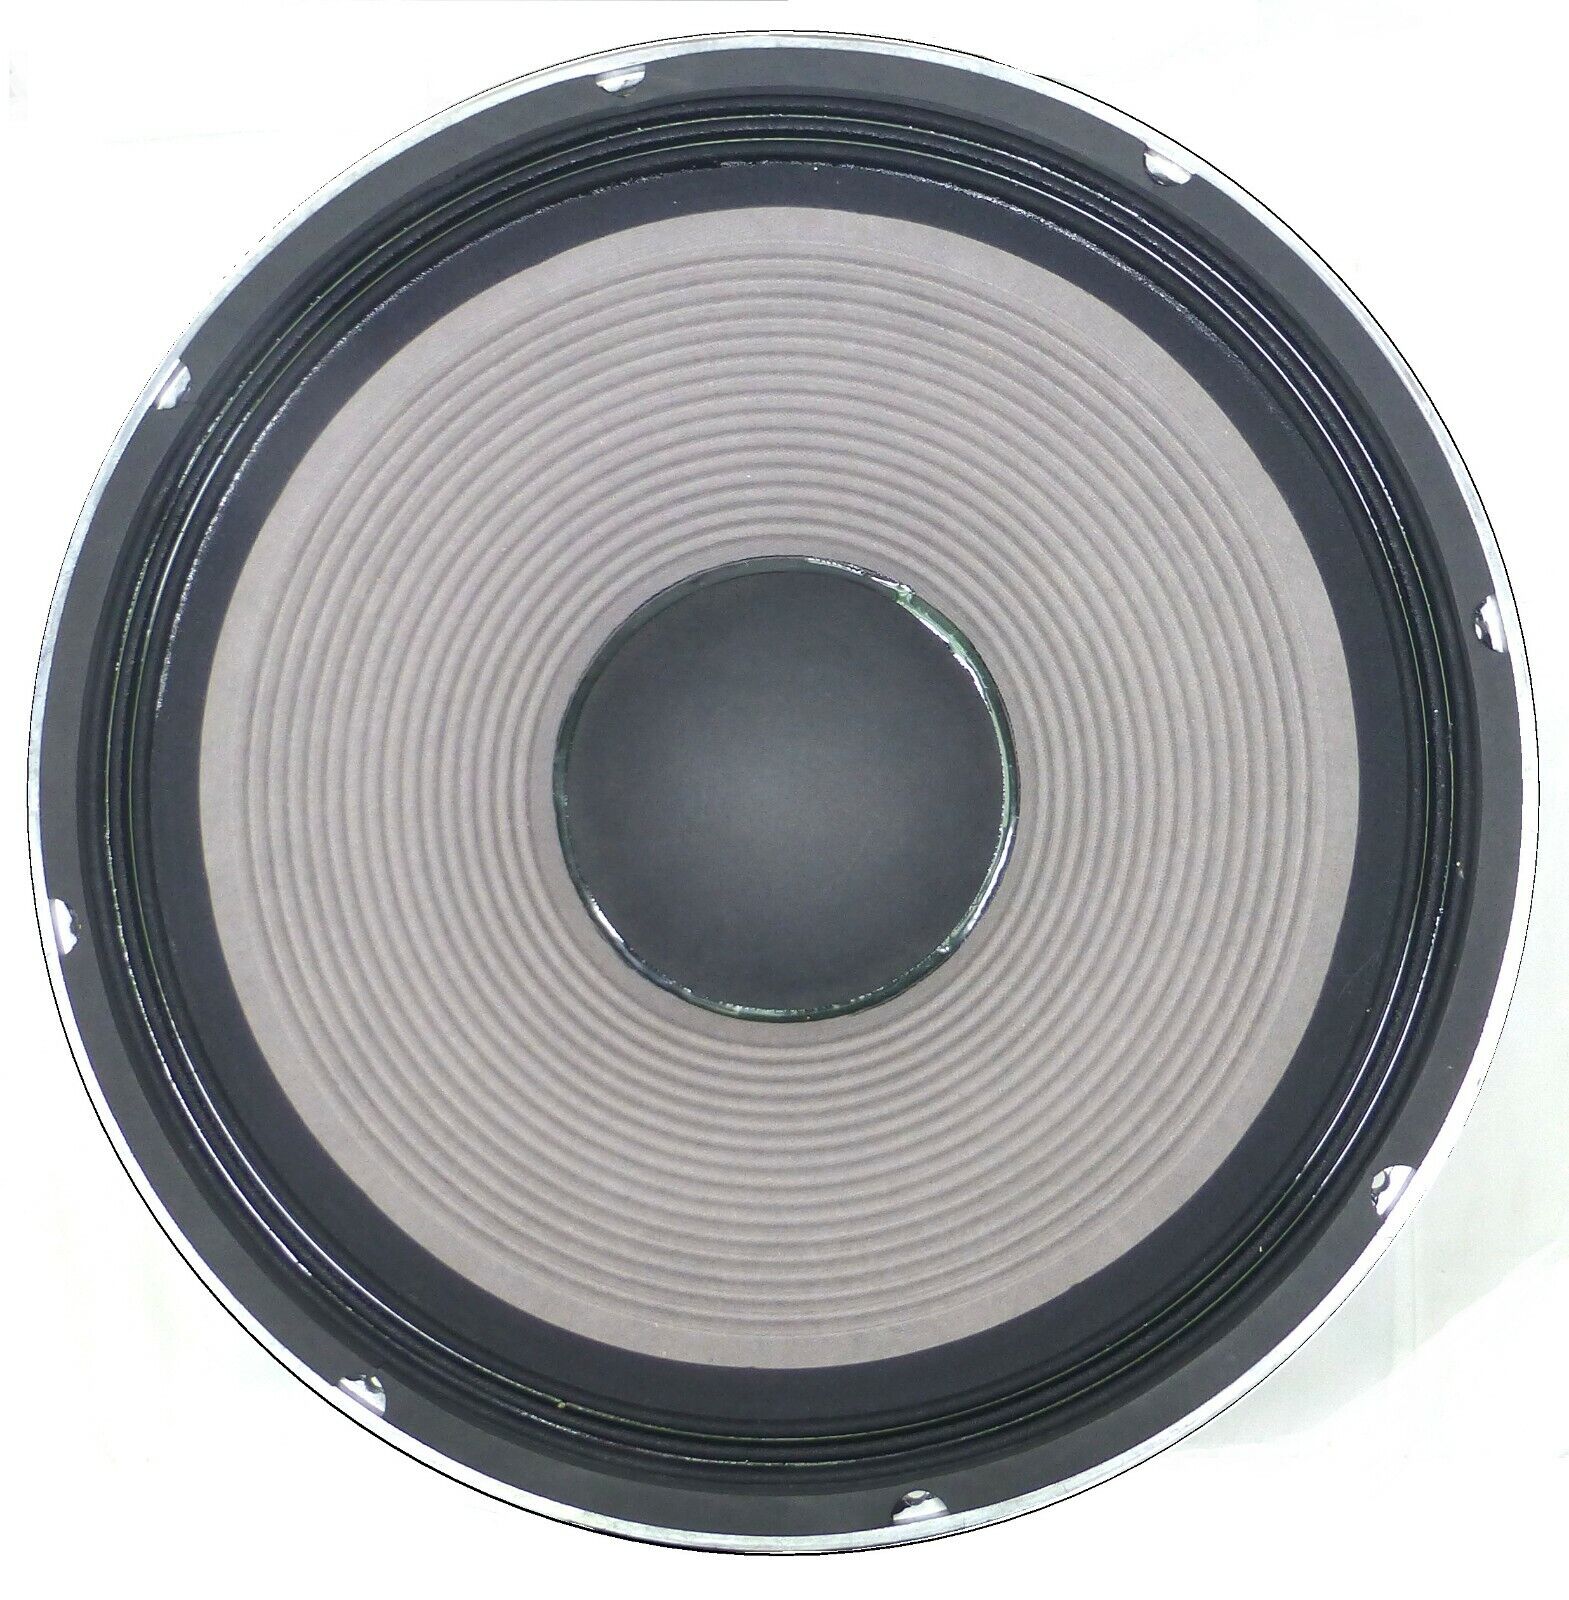 LASE Replacement 18" Speaker for JBL268G / Eon 518S